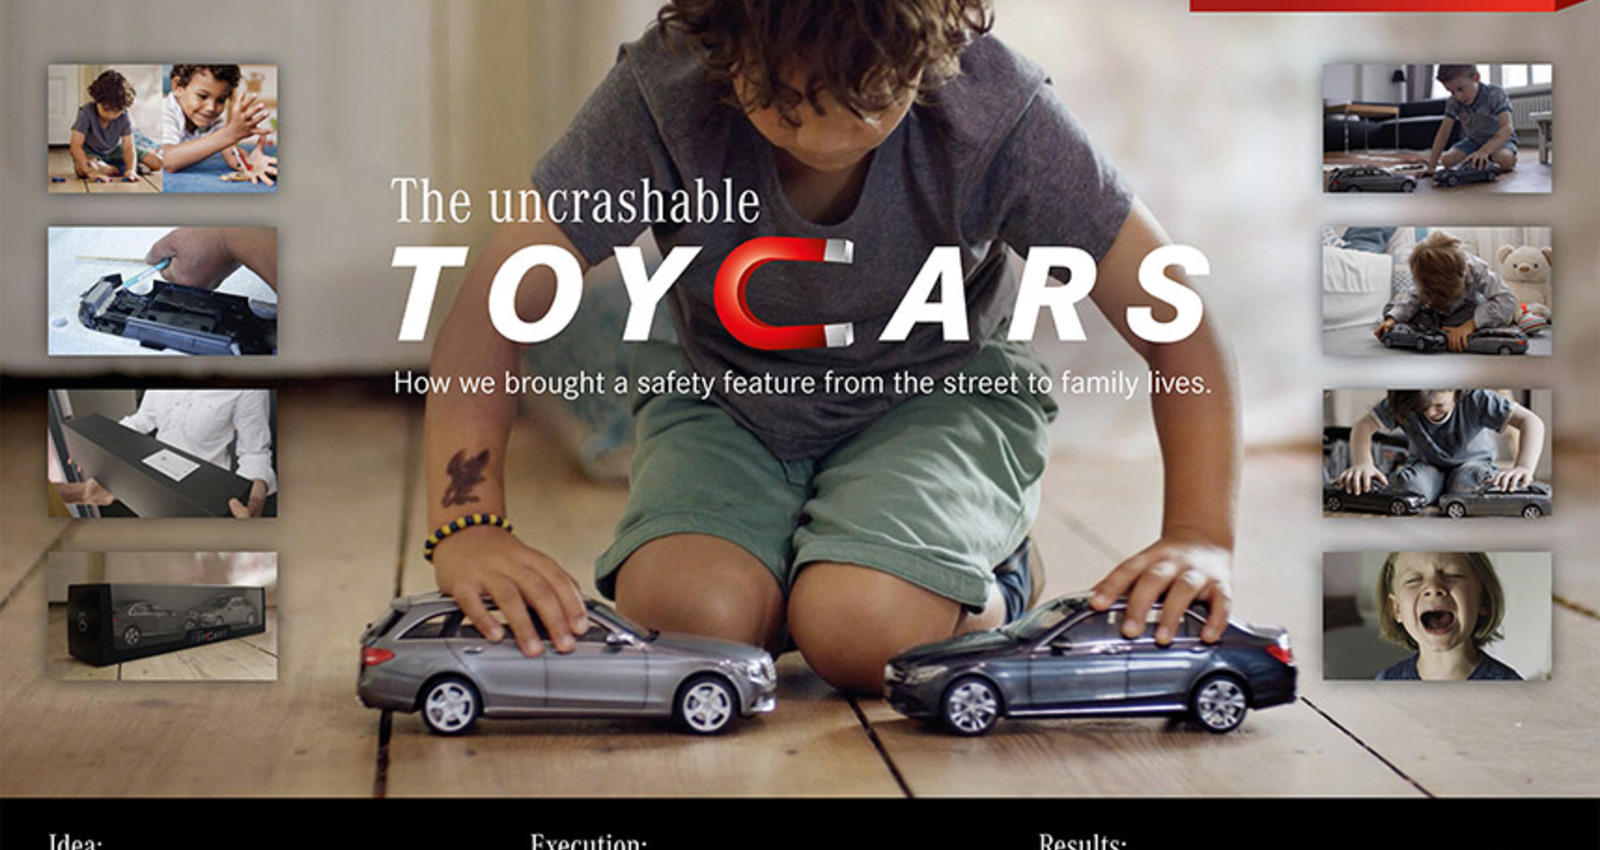 The Uncrashable Toycars